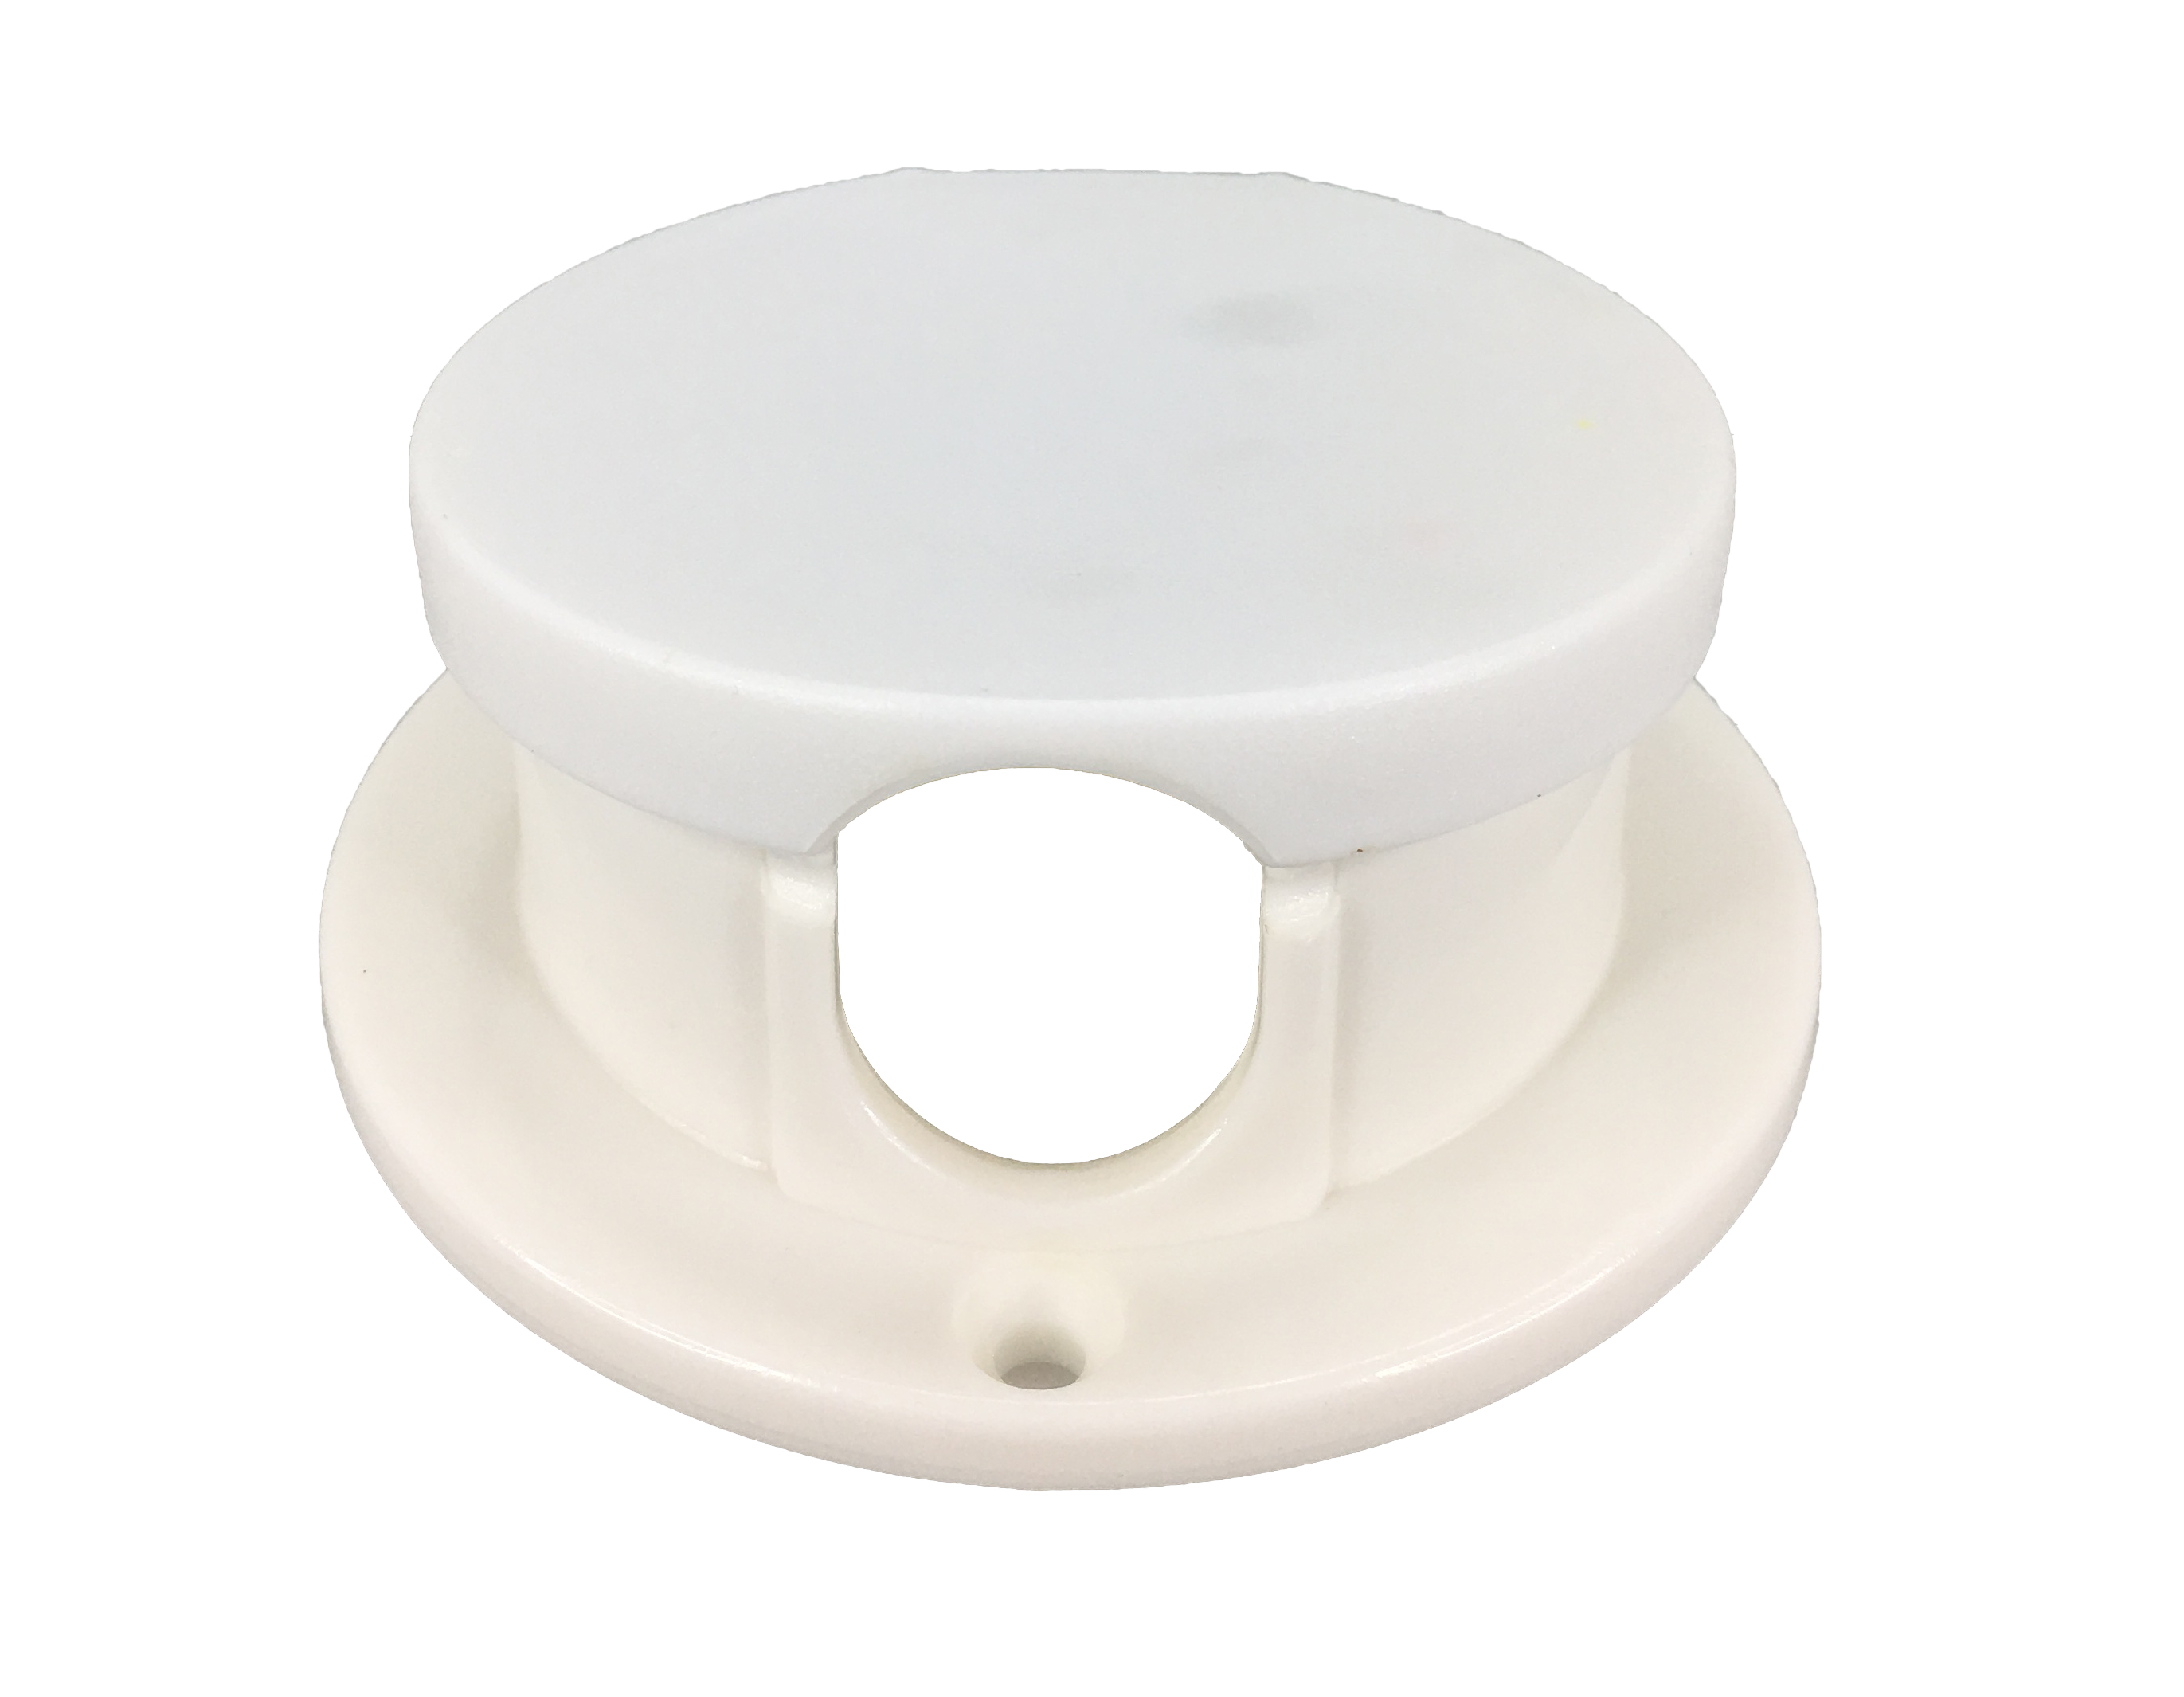 Pactrade Marine Boat White Plastic Anchor Hinge Lid Rope Deck Pipe